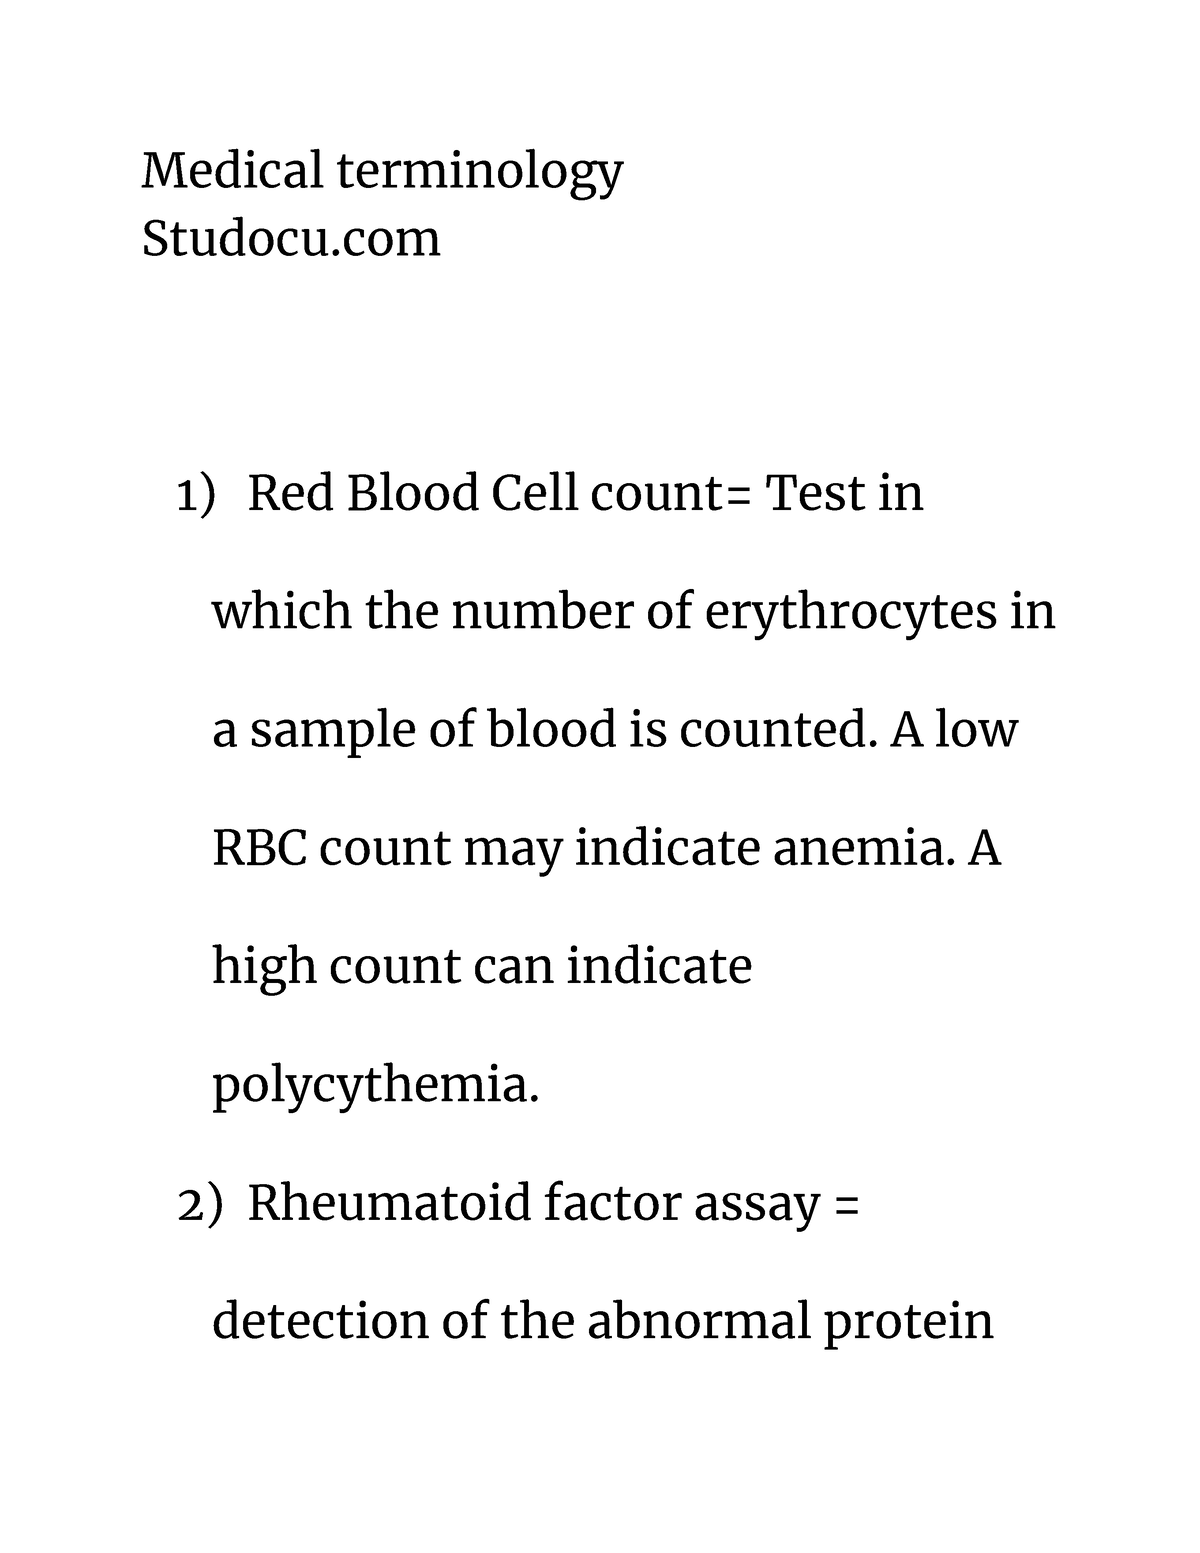 22-notes-medical-terminology-studocu-red-blood-cell-count-test-in